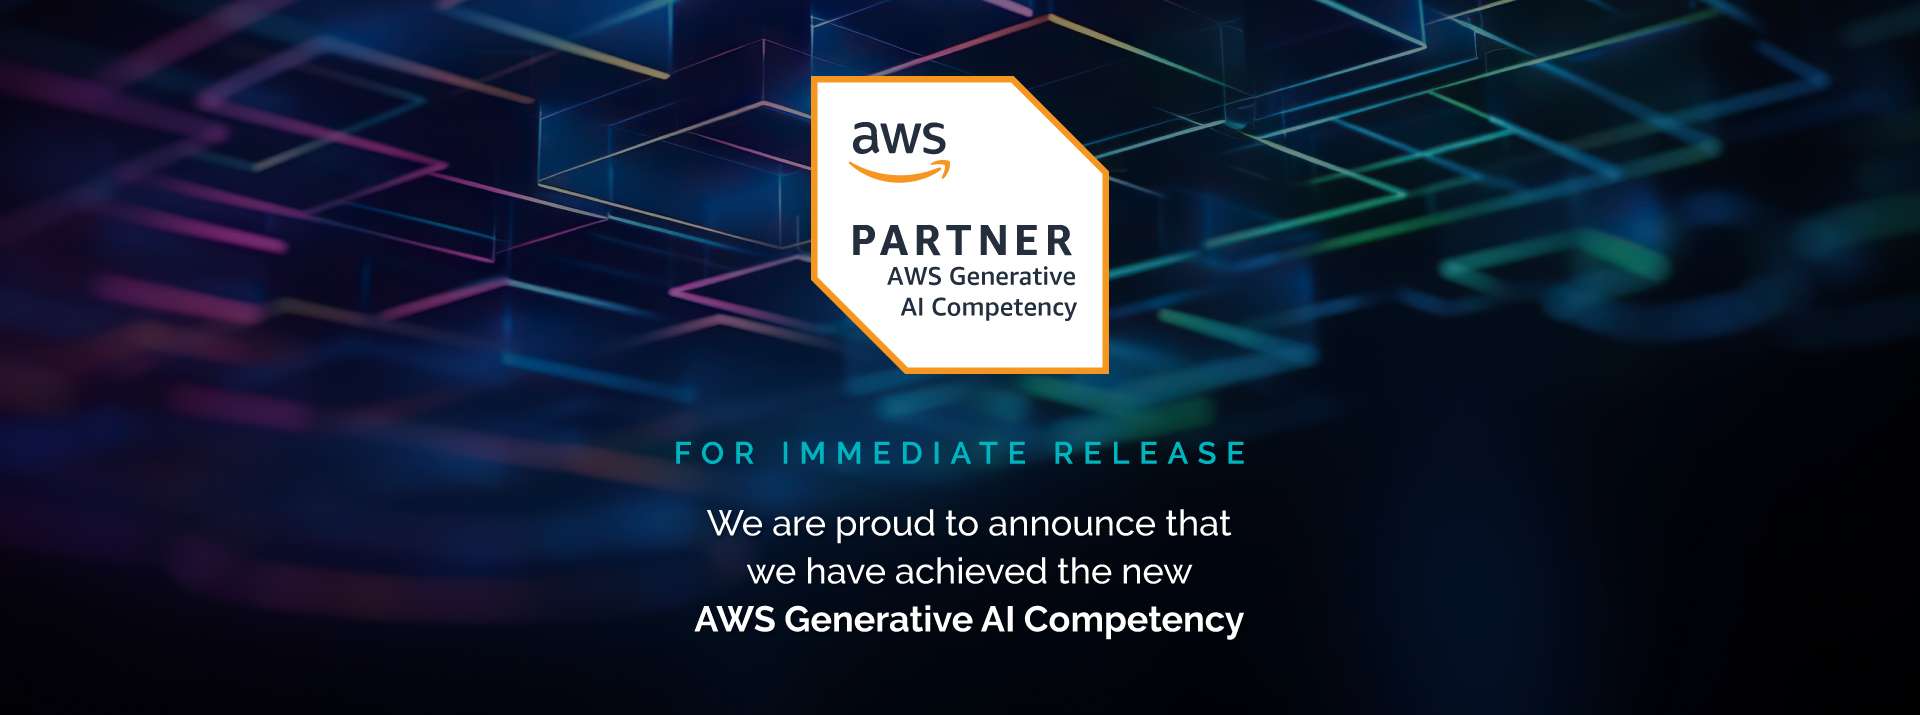 Innovative Solutions Achieves the New AWS Generative AI Competency